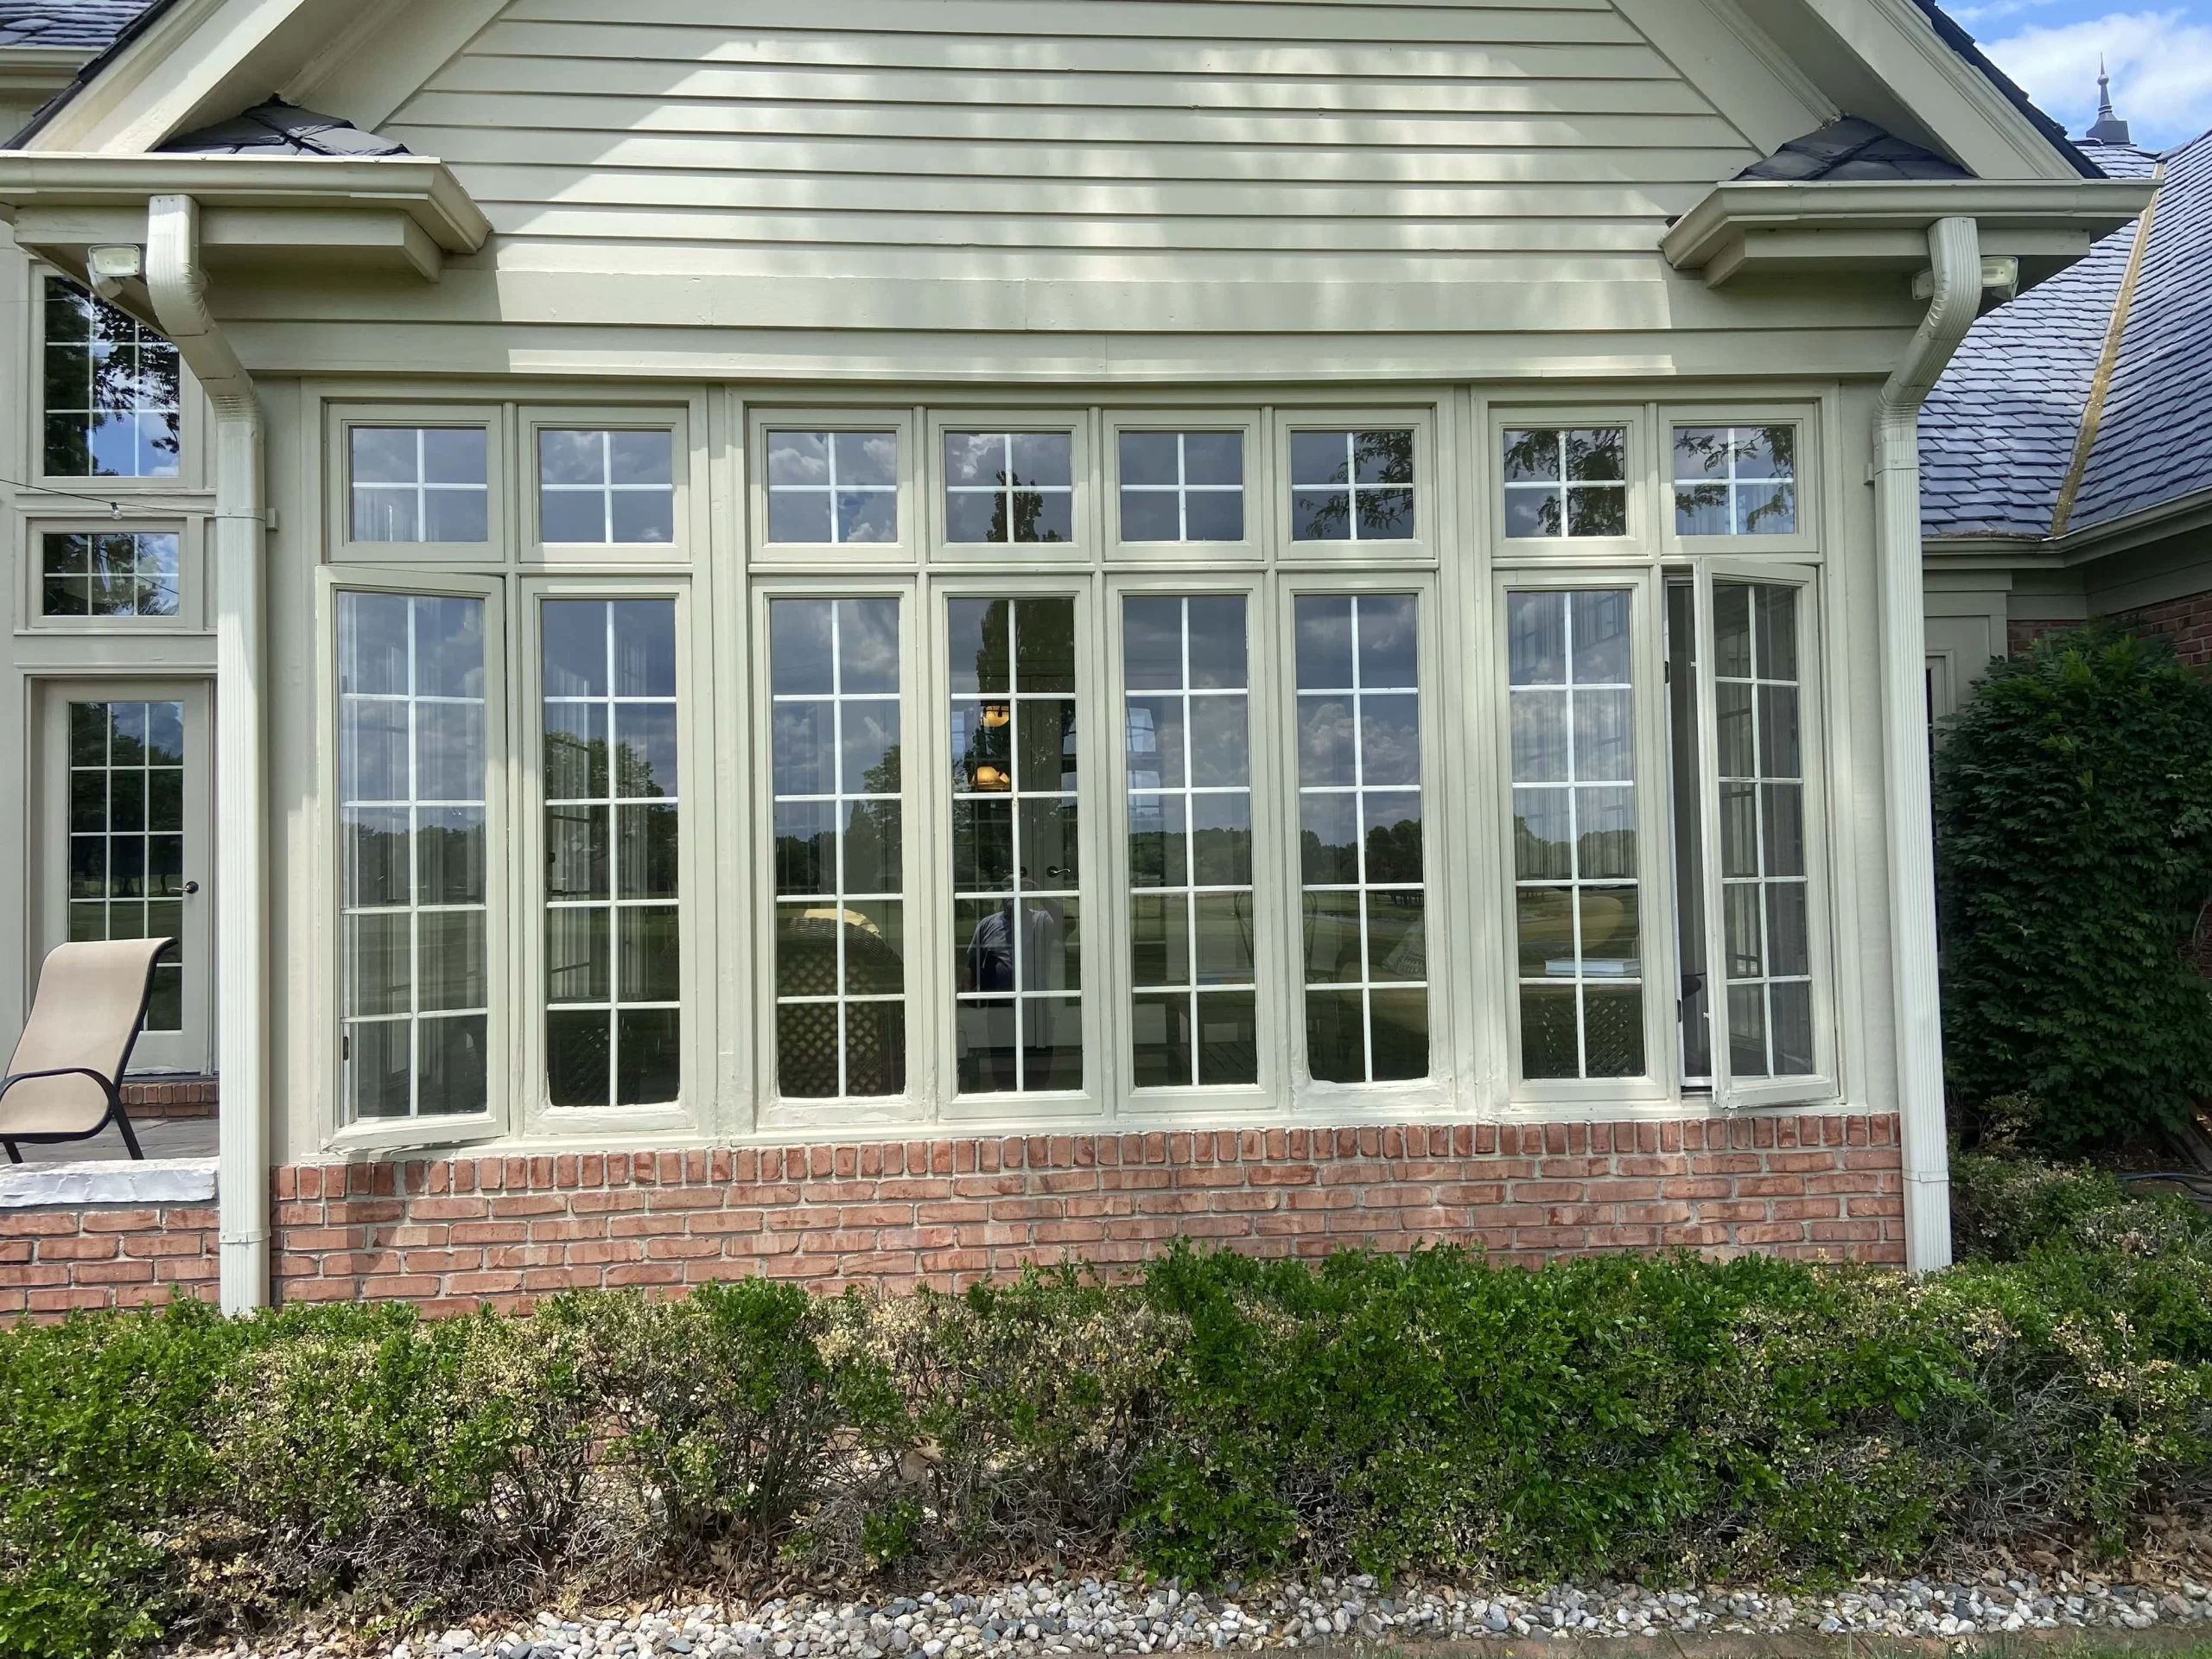 Rotten Wood Window Frame Repair and Restoration in West Chicago, IL